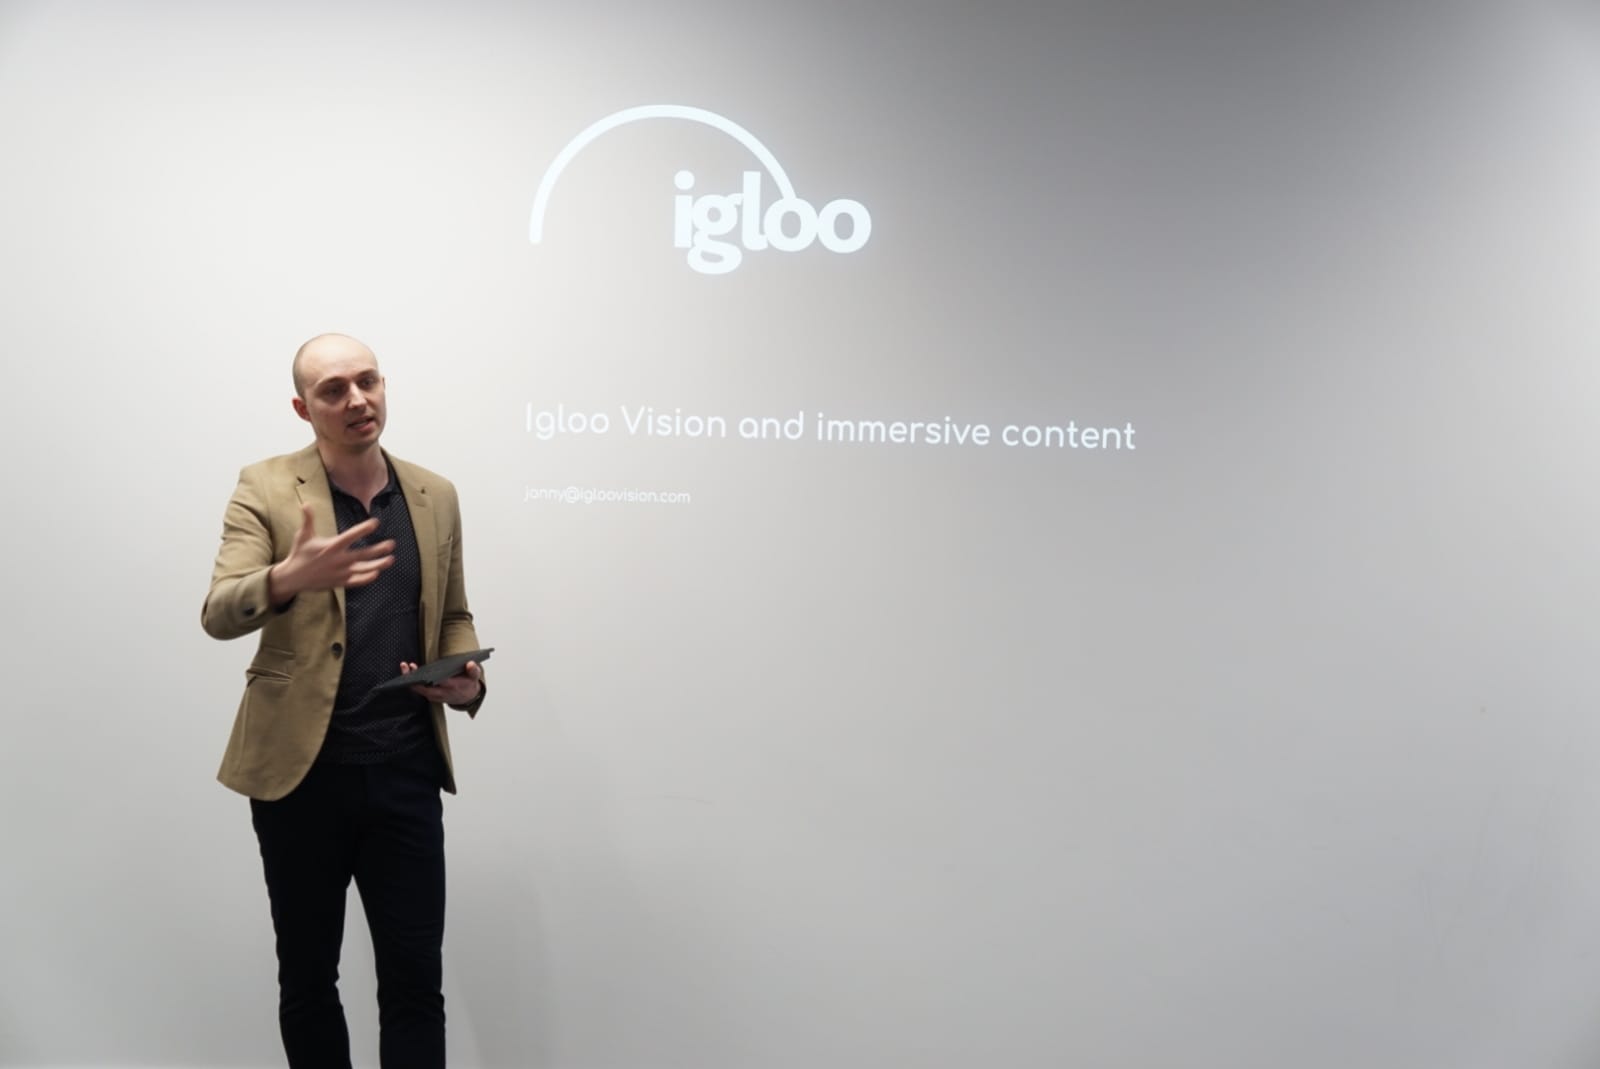 Man presenting about Igloo Vision and immersive content